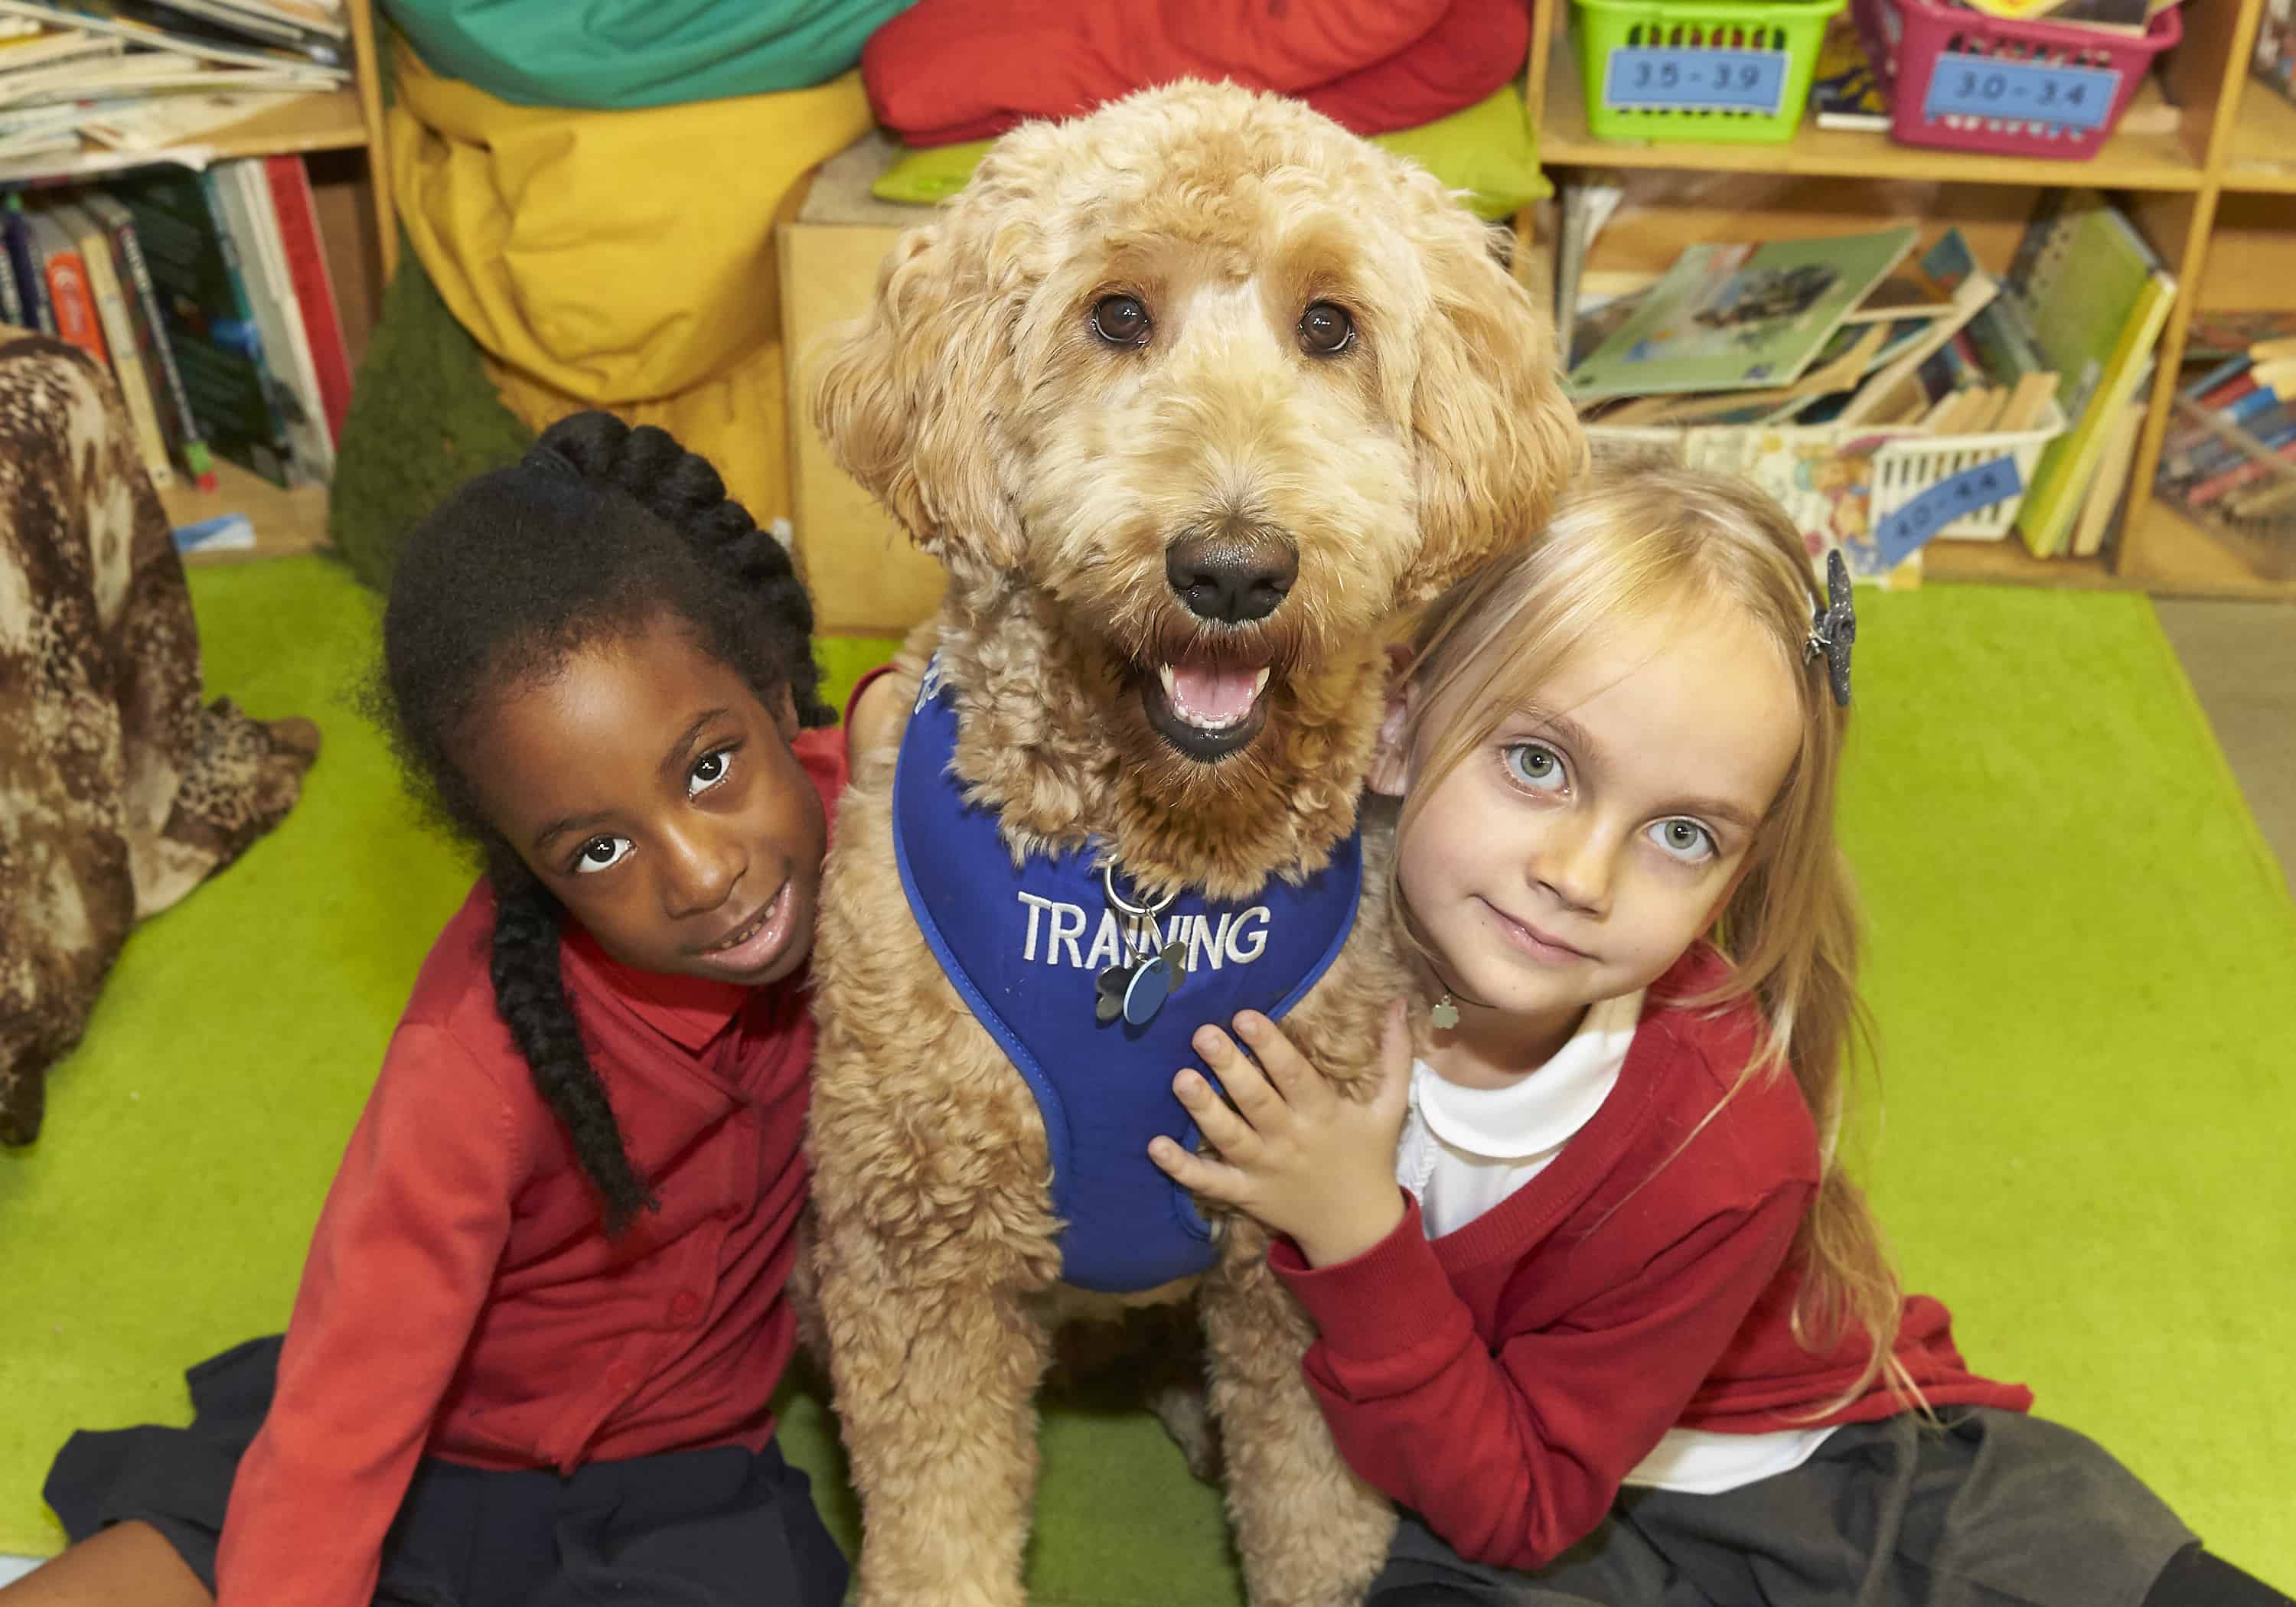 The therapy dog will help pupils with autism ©Clive Totman 2018